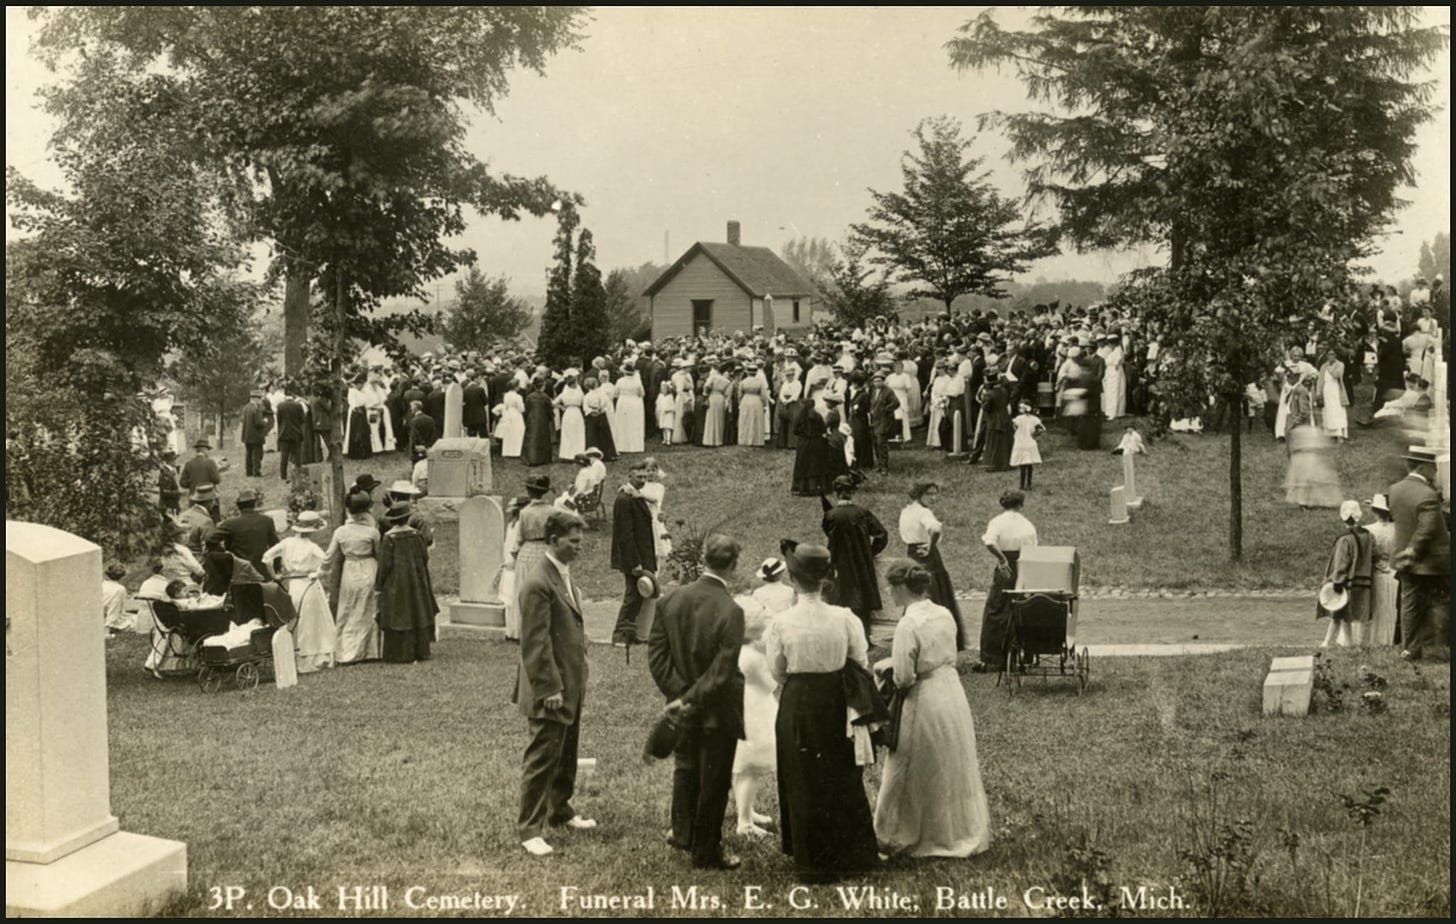 Ted Wilson on Twitter: "Photo: Ellen White's burial at a cemetery in Battle  Creek, Michigan. Credit: Center for Adventist Research  https://t.co/QjfJMvFq2g" / Twitter